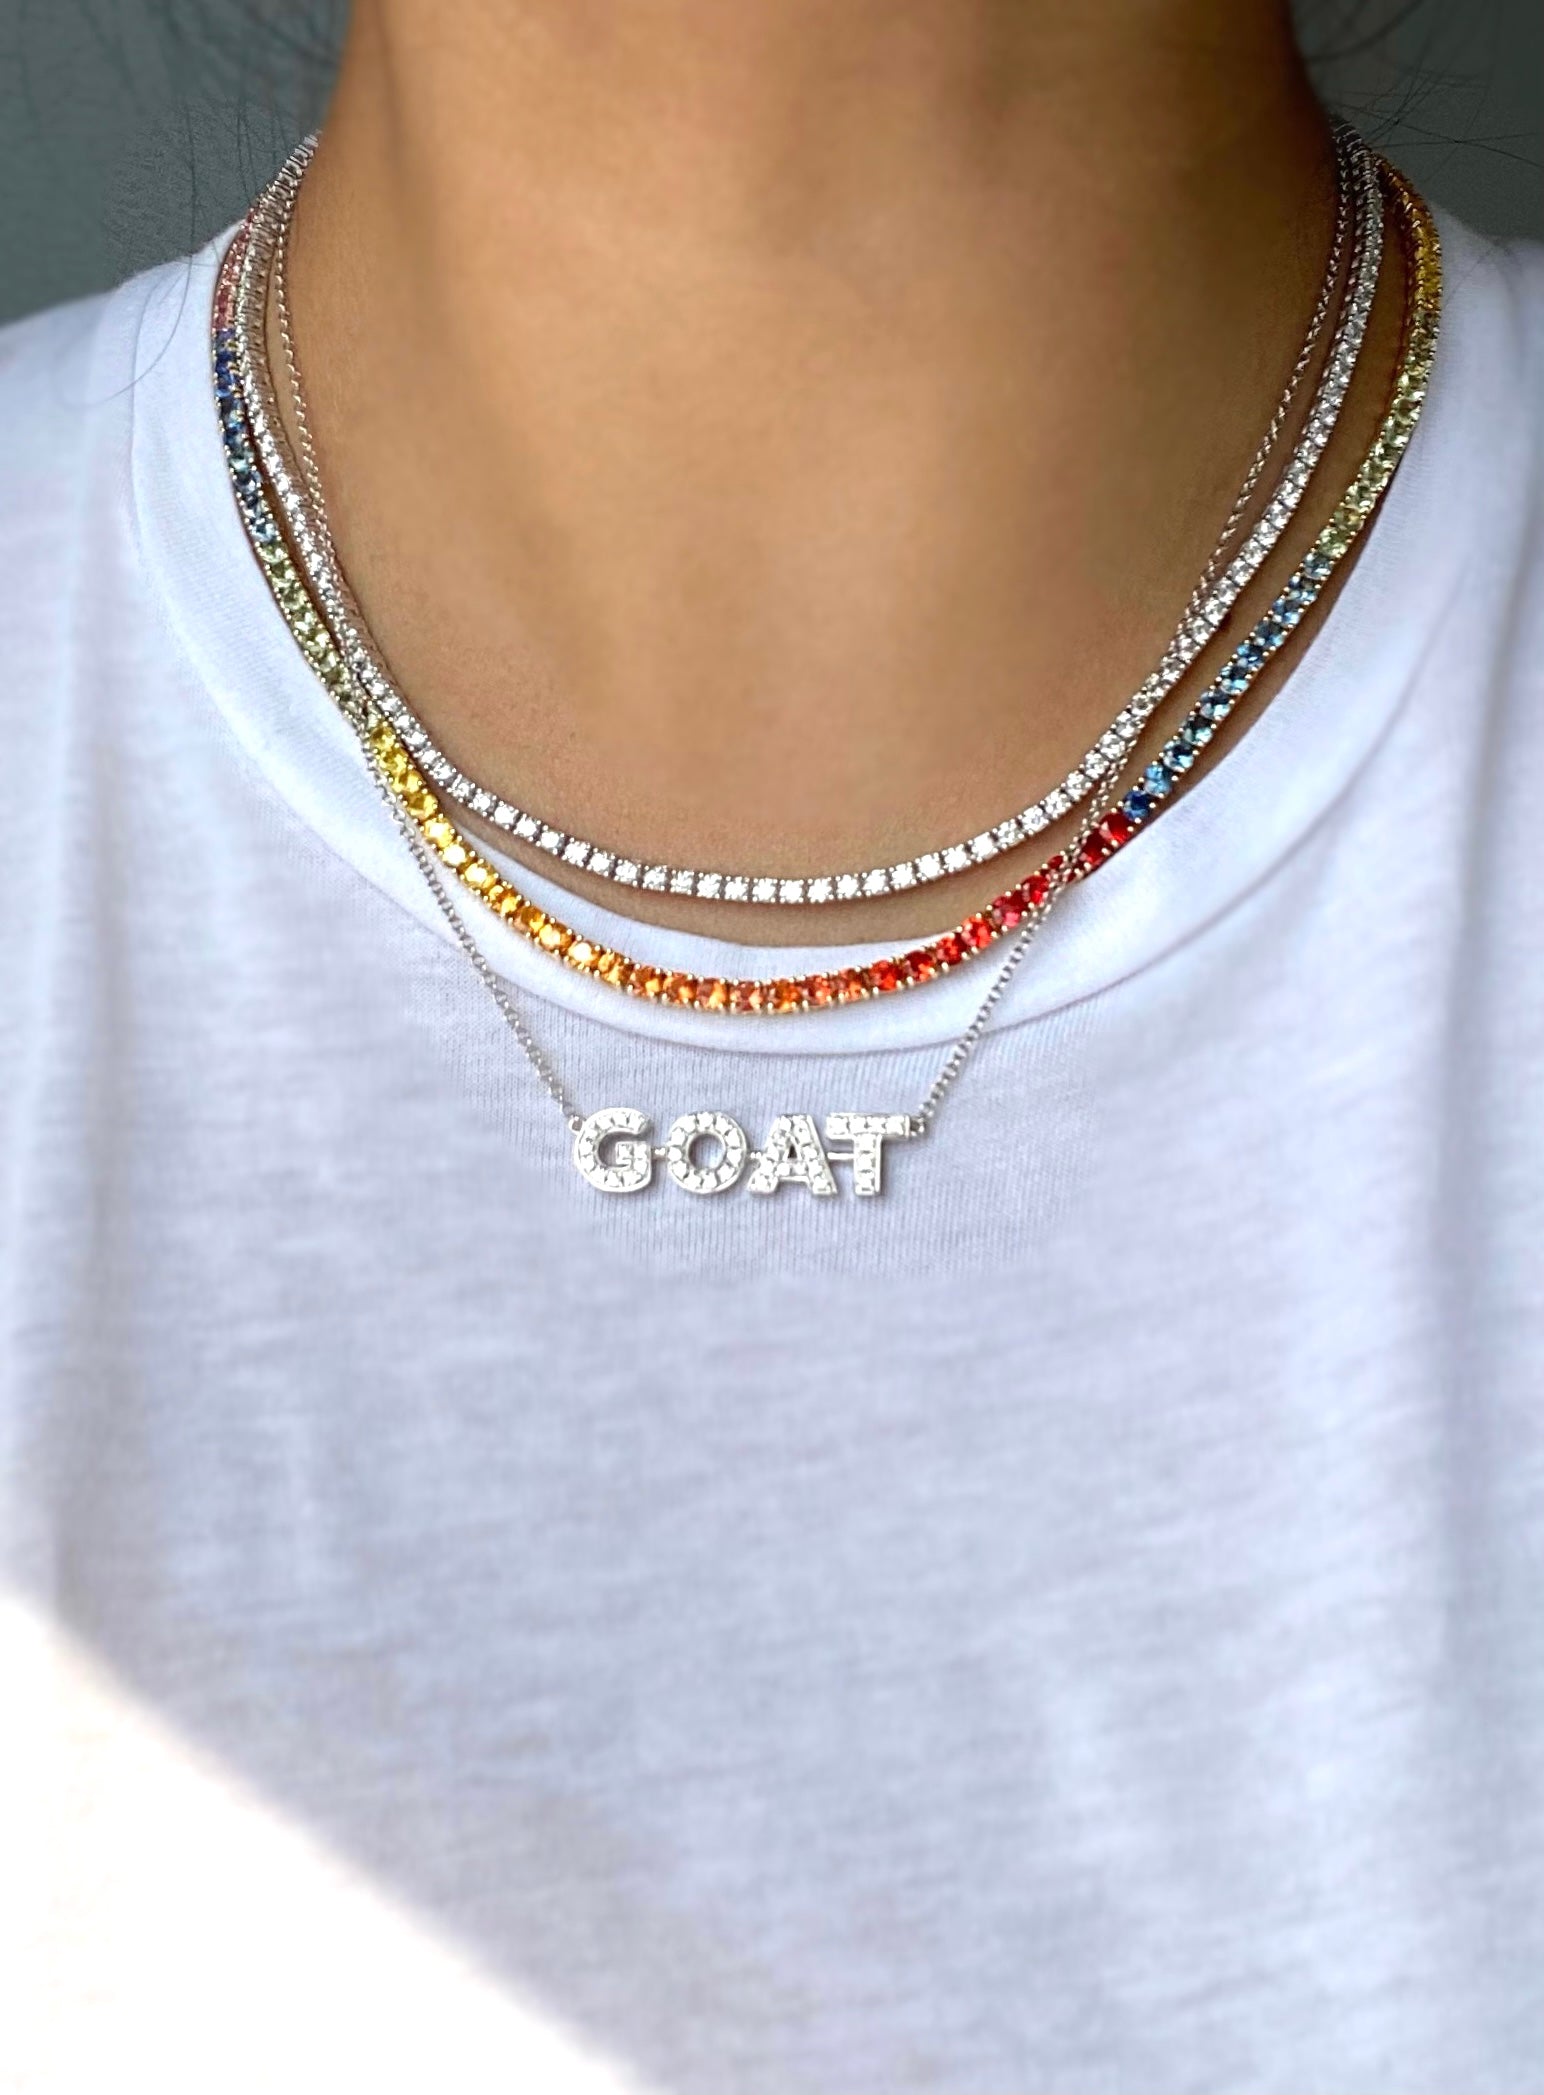 G.O.A.T. Diamond Necklace in White Gold